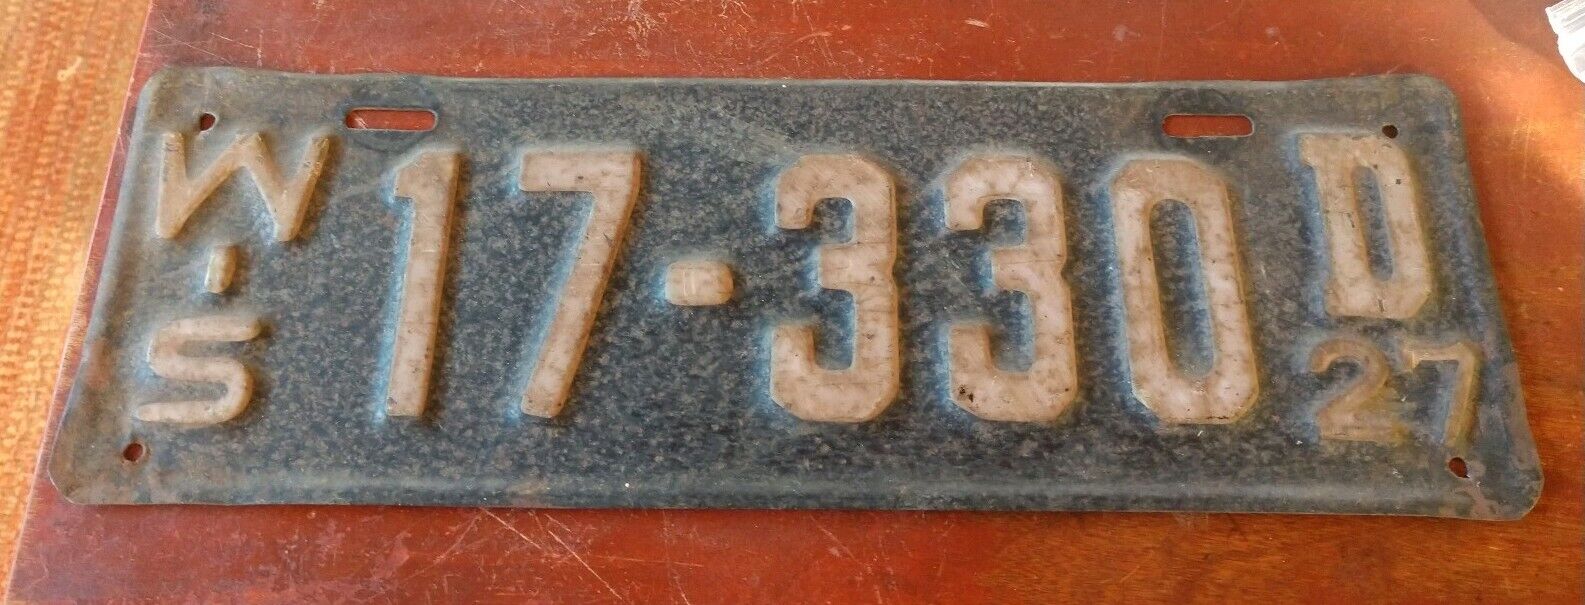 1927 Wisconsin License Plate 17-330 D unrestored condition, single plate